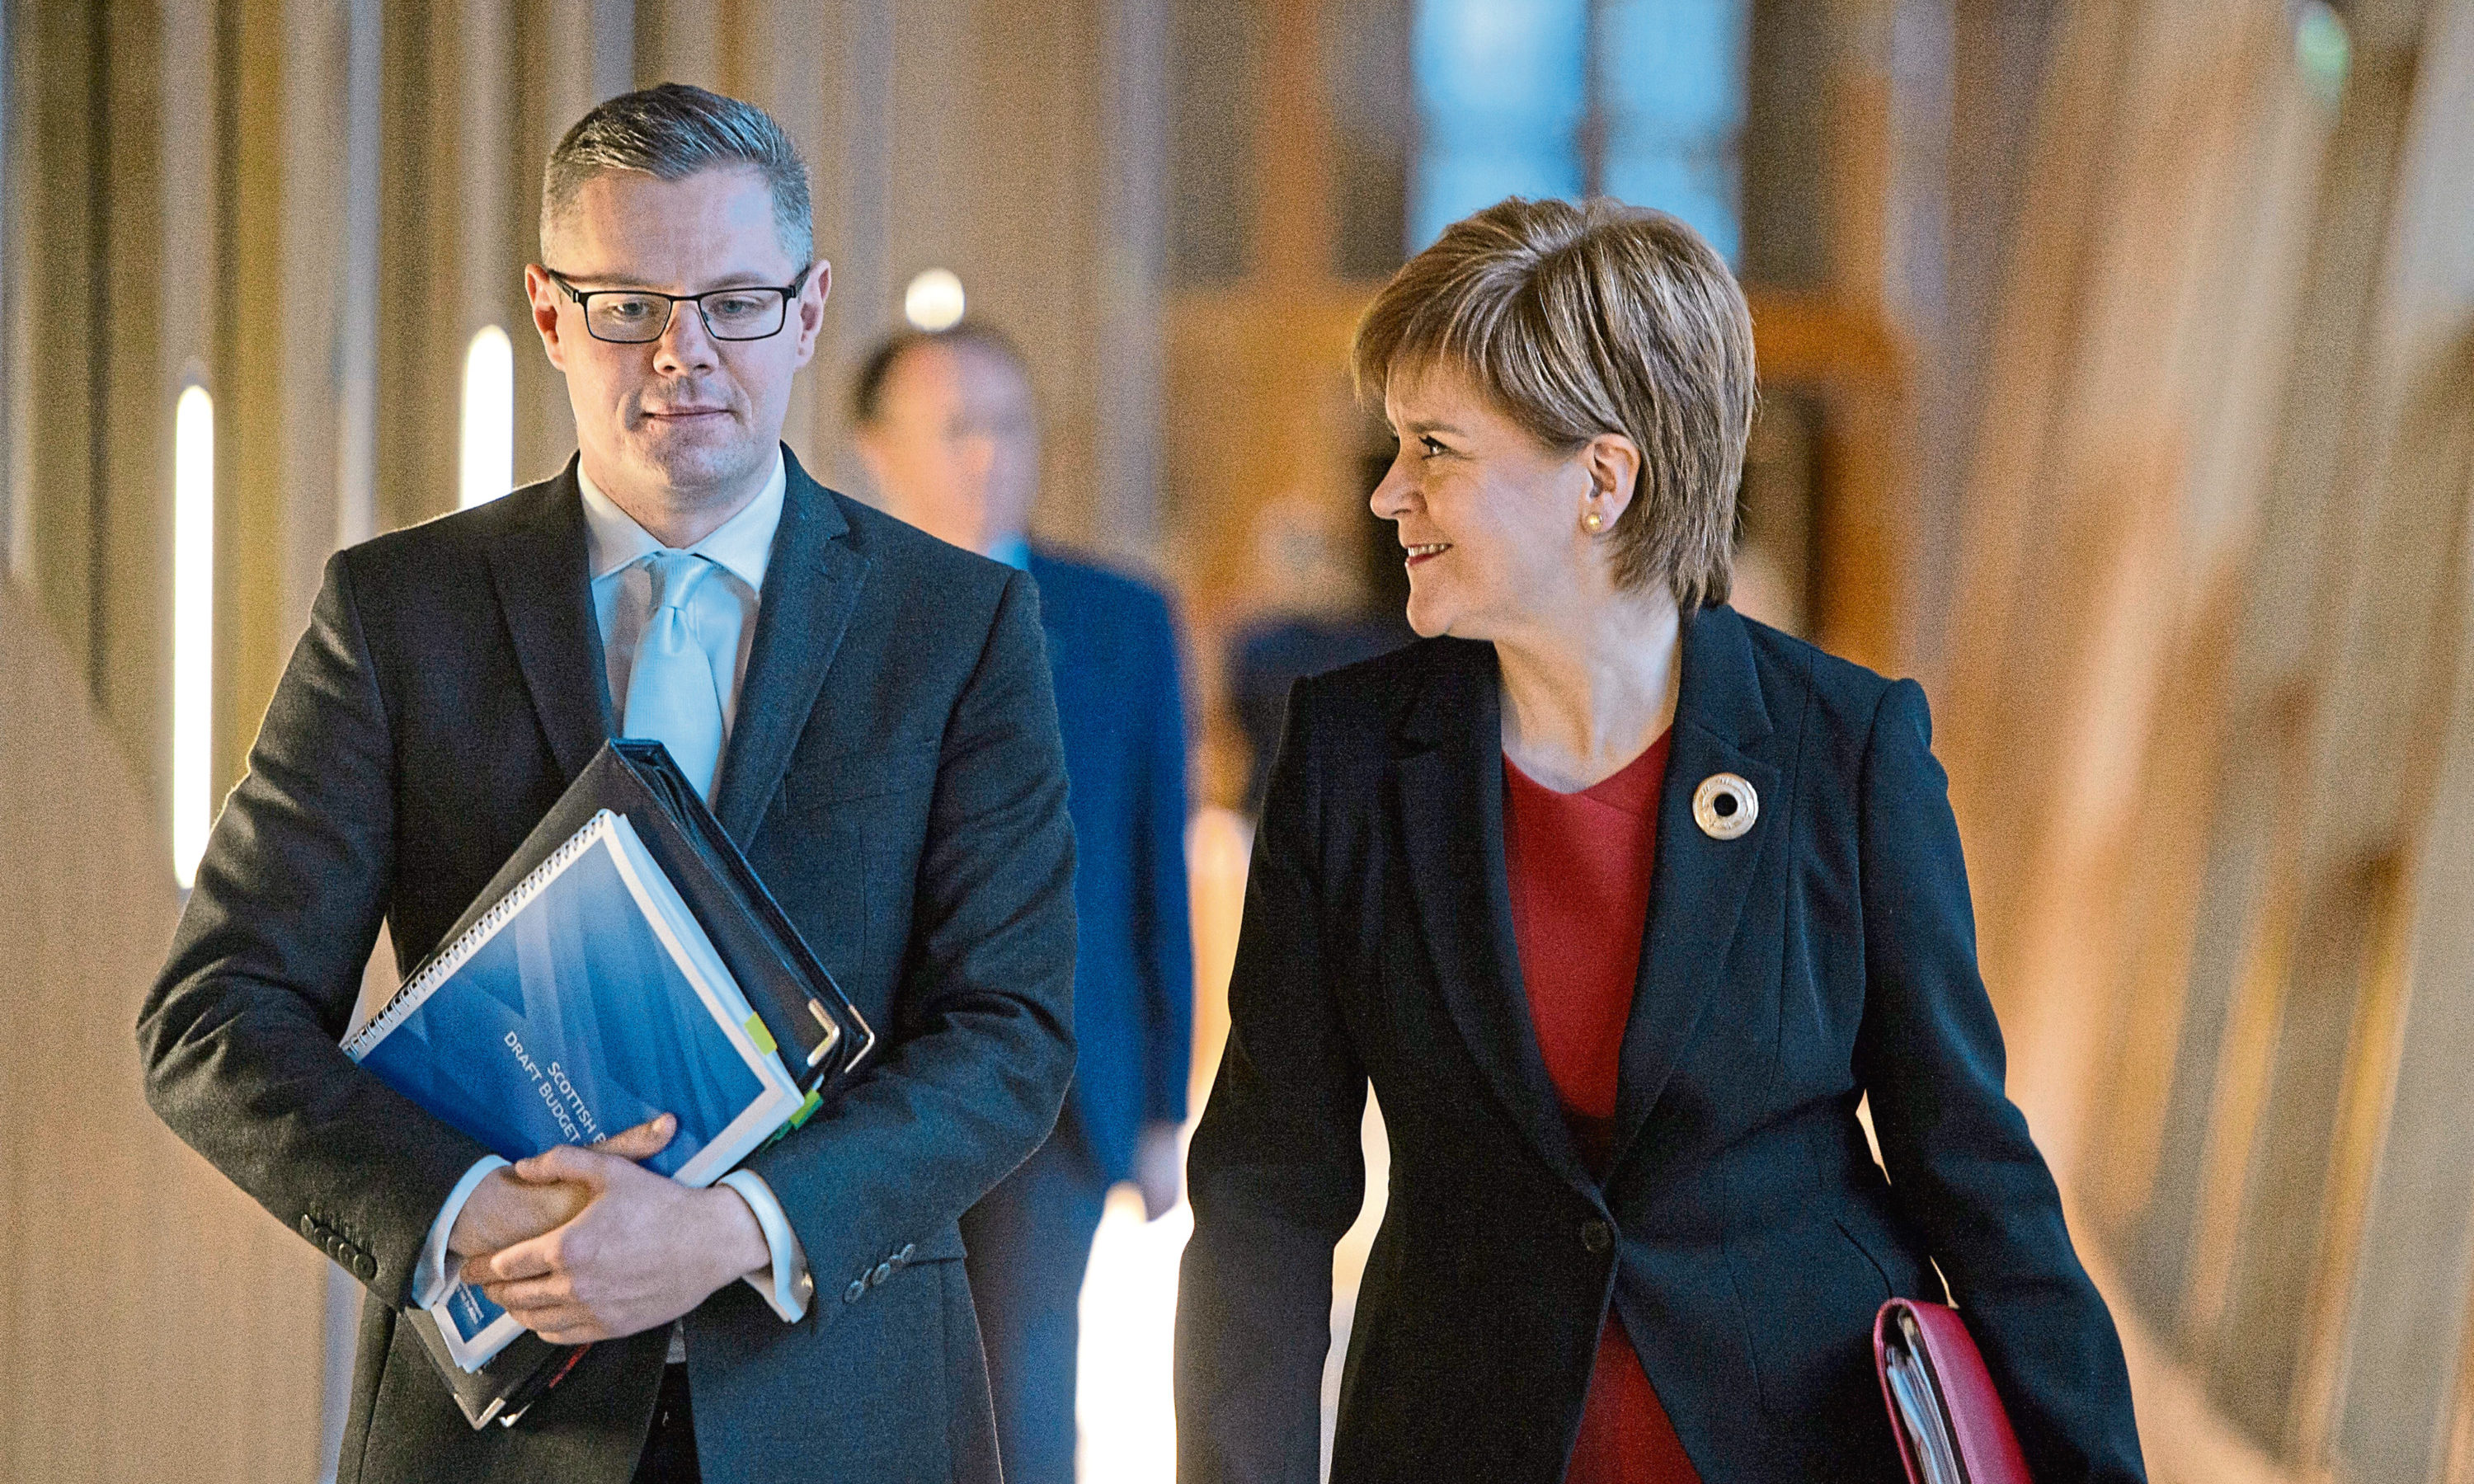 First Minister Nicola Sturgeon and Finance Secretary Derek Mackay arrive to delivering his draft Budget for 2018-19 at the Scottish Parliament in Edinburgh.